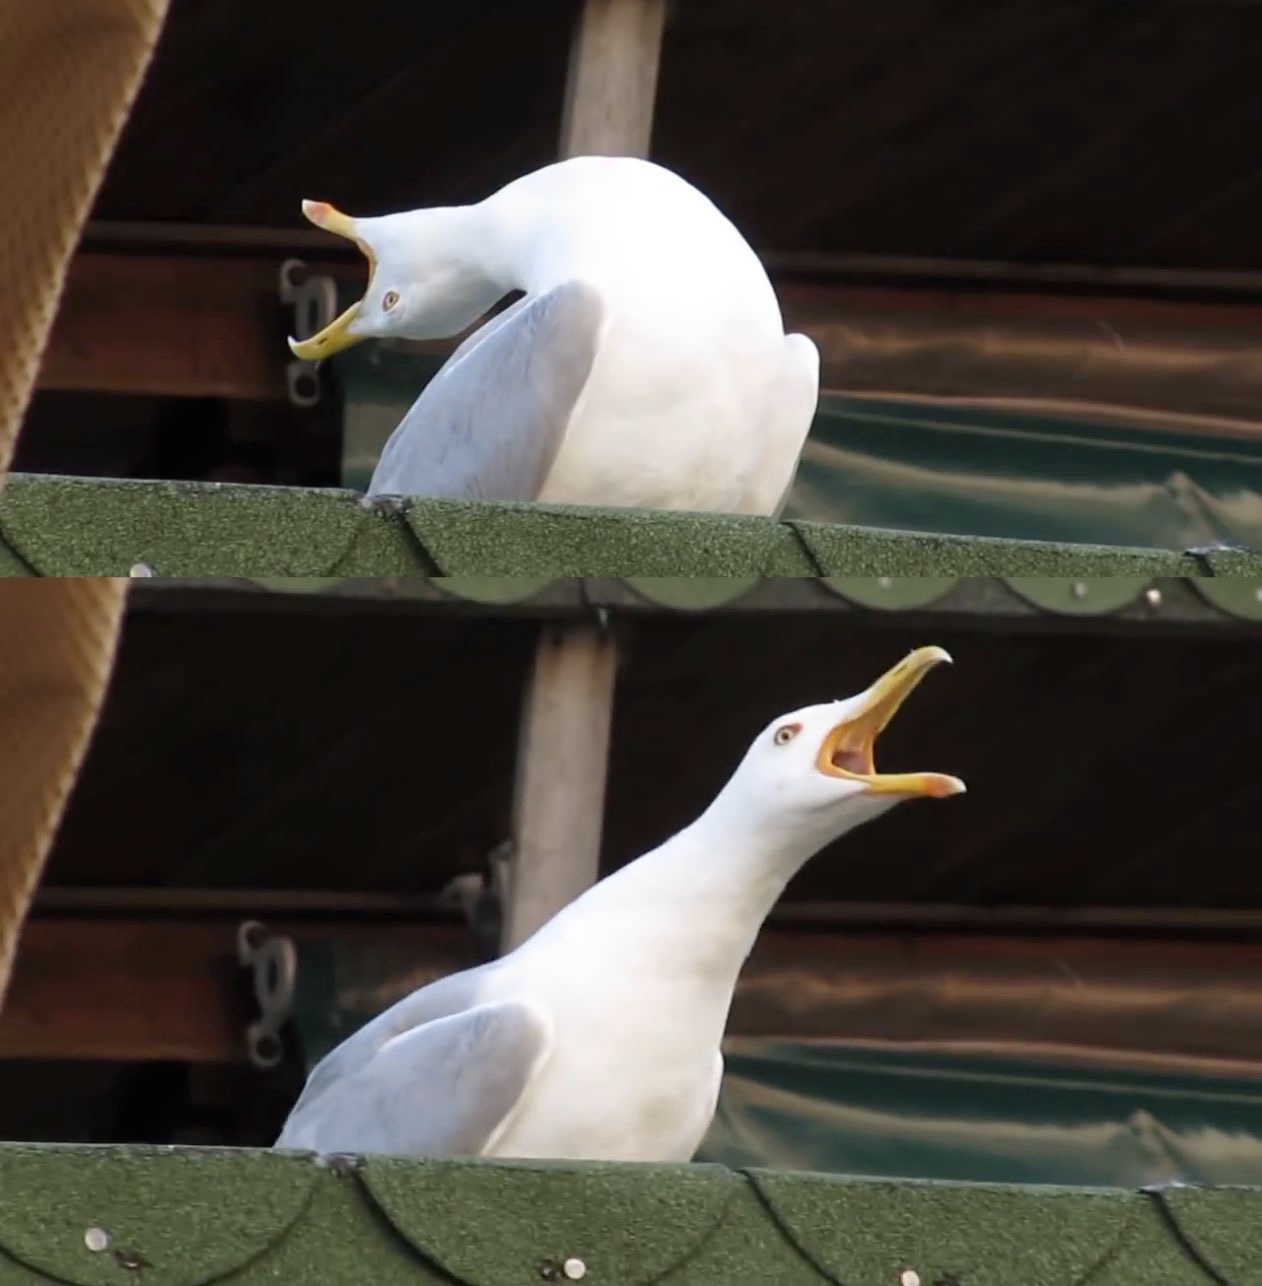 No "Seagull" memes have been featured yet. 